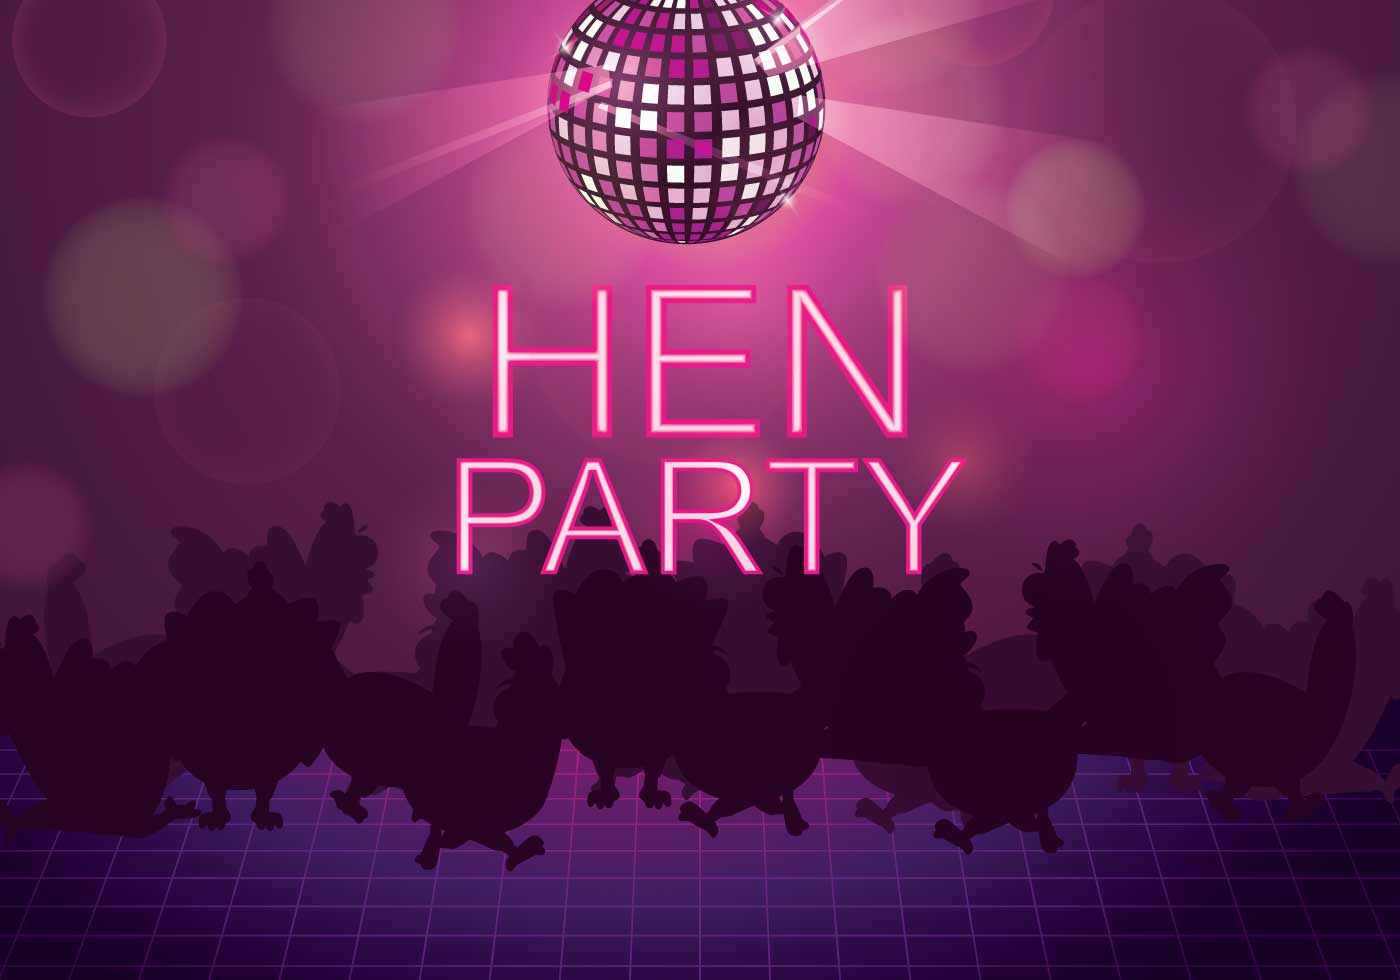 Don't be chicken; have your hen party at the club! 